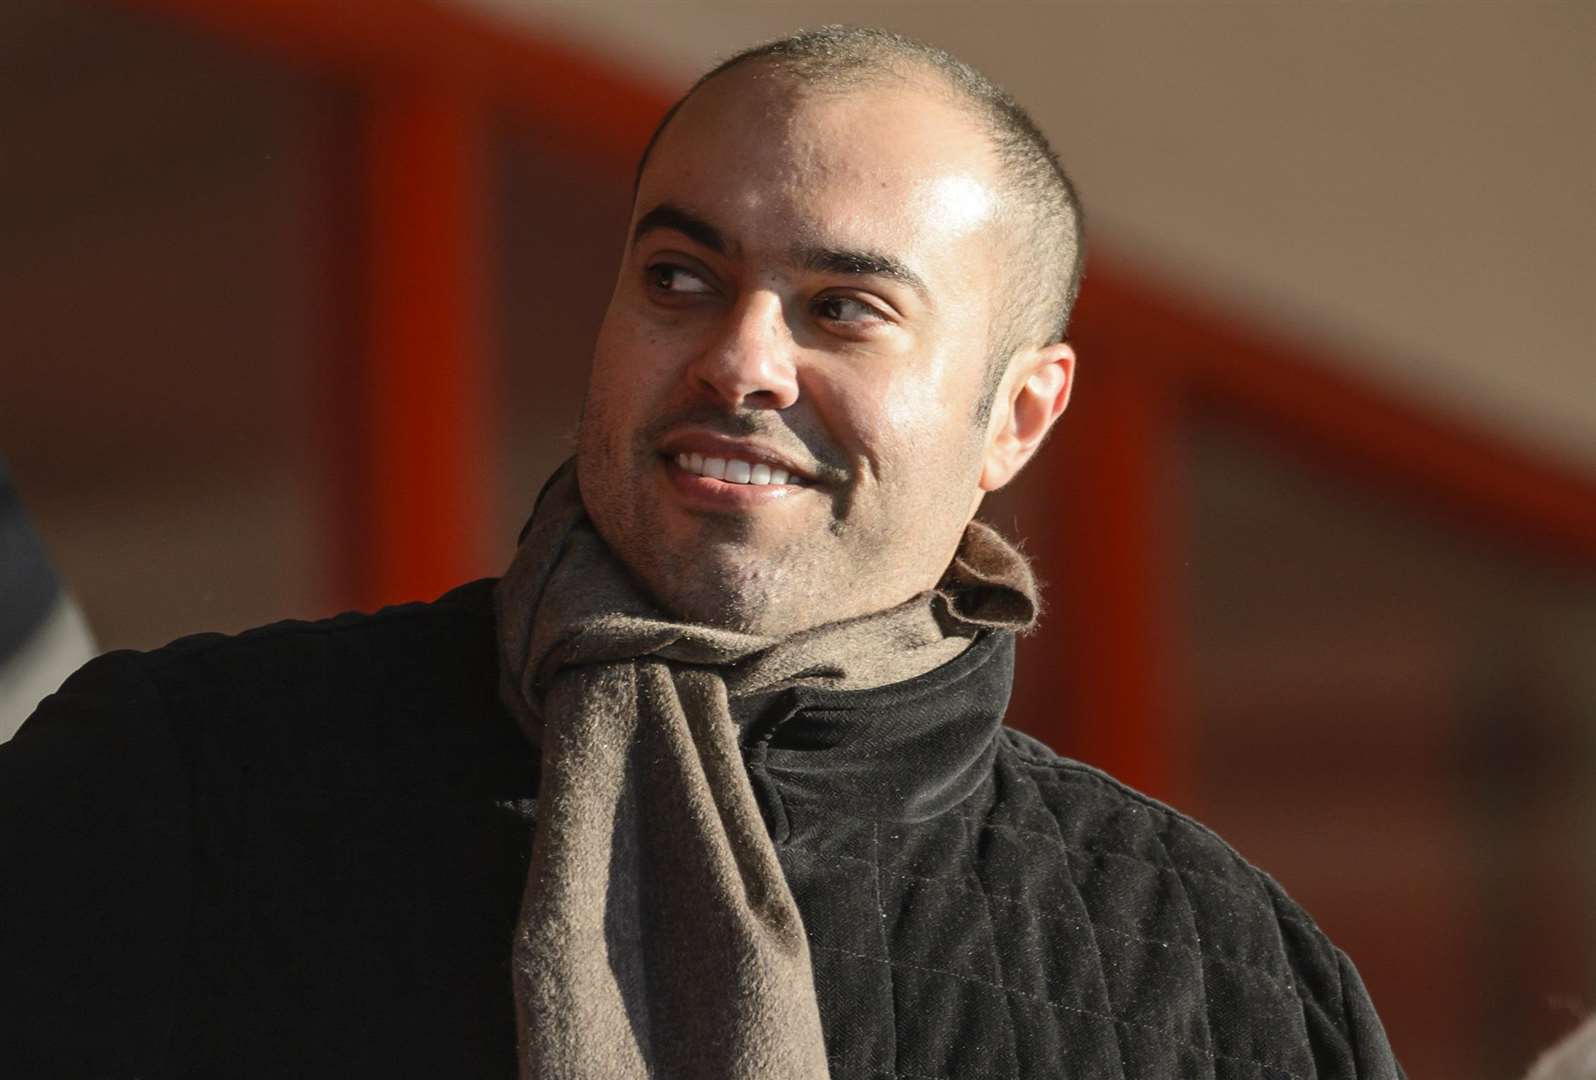 Ebbsfleet United owner and chairman Dr Abdulla Al-Humaidi has become chief executive of London Resort Company Holdings